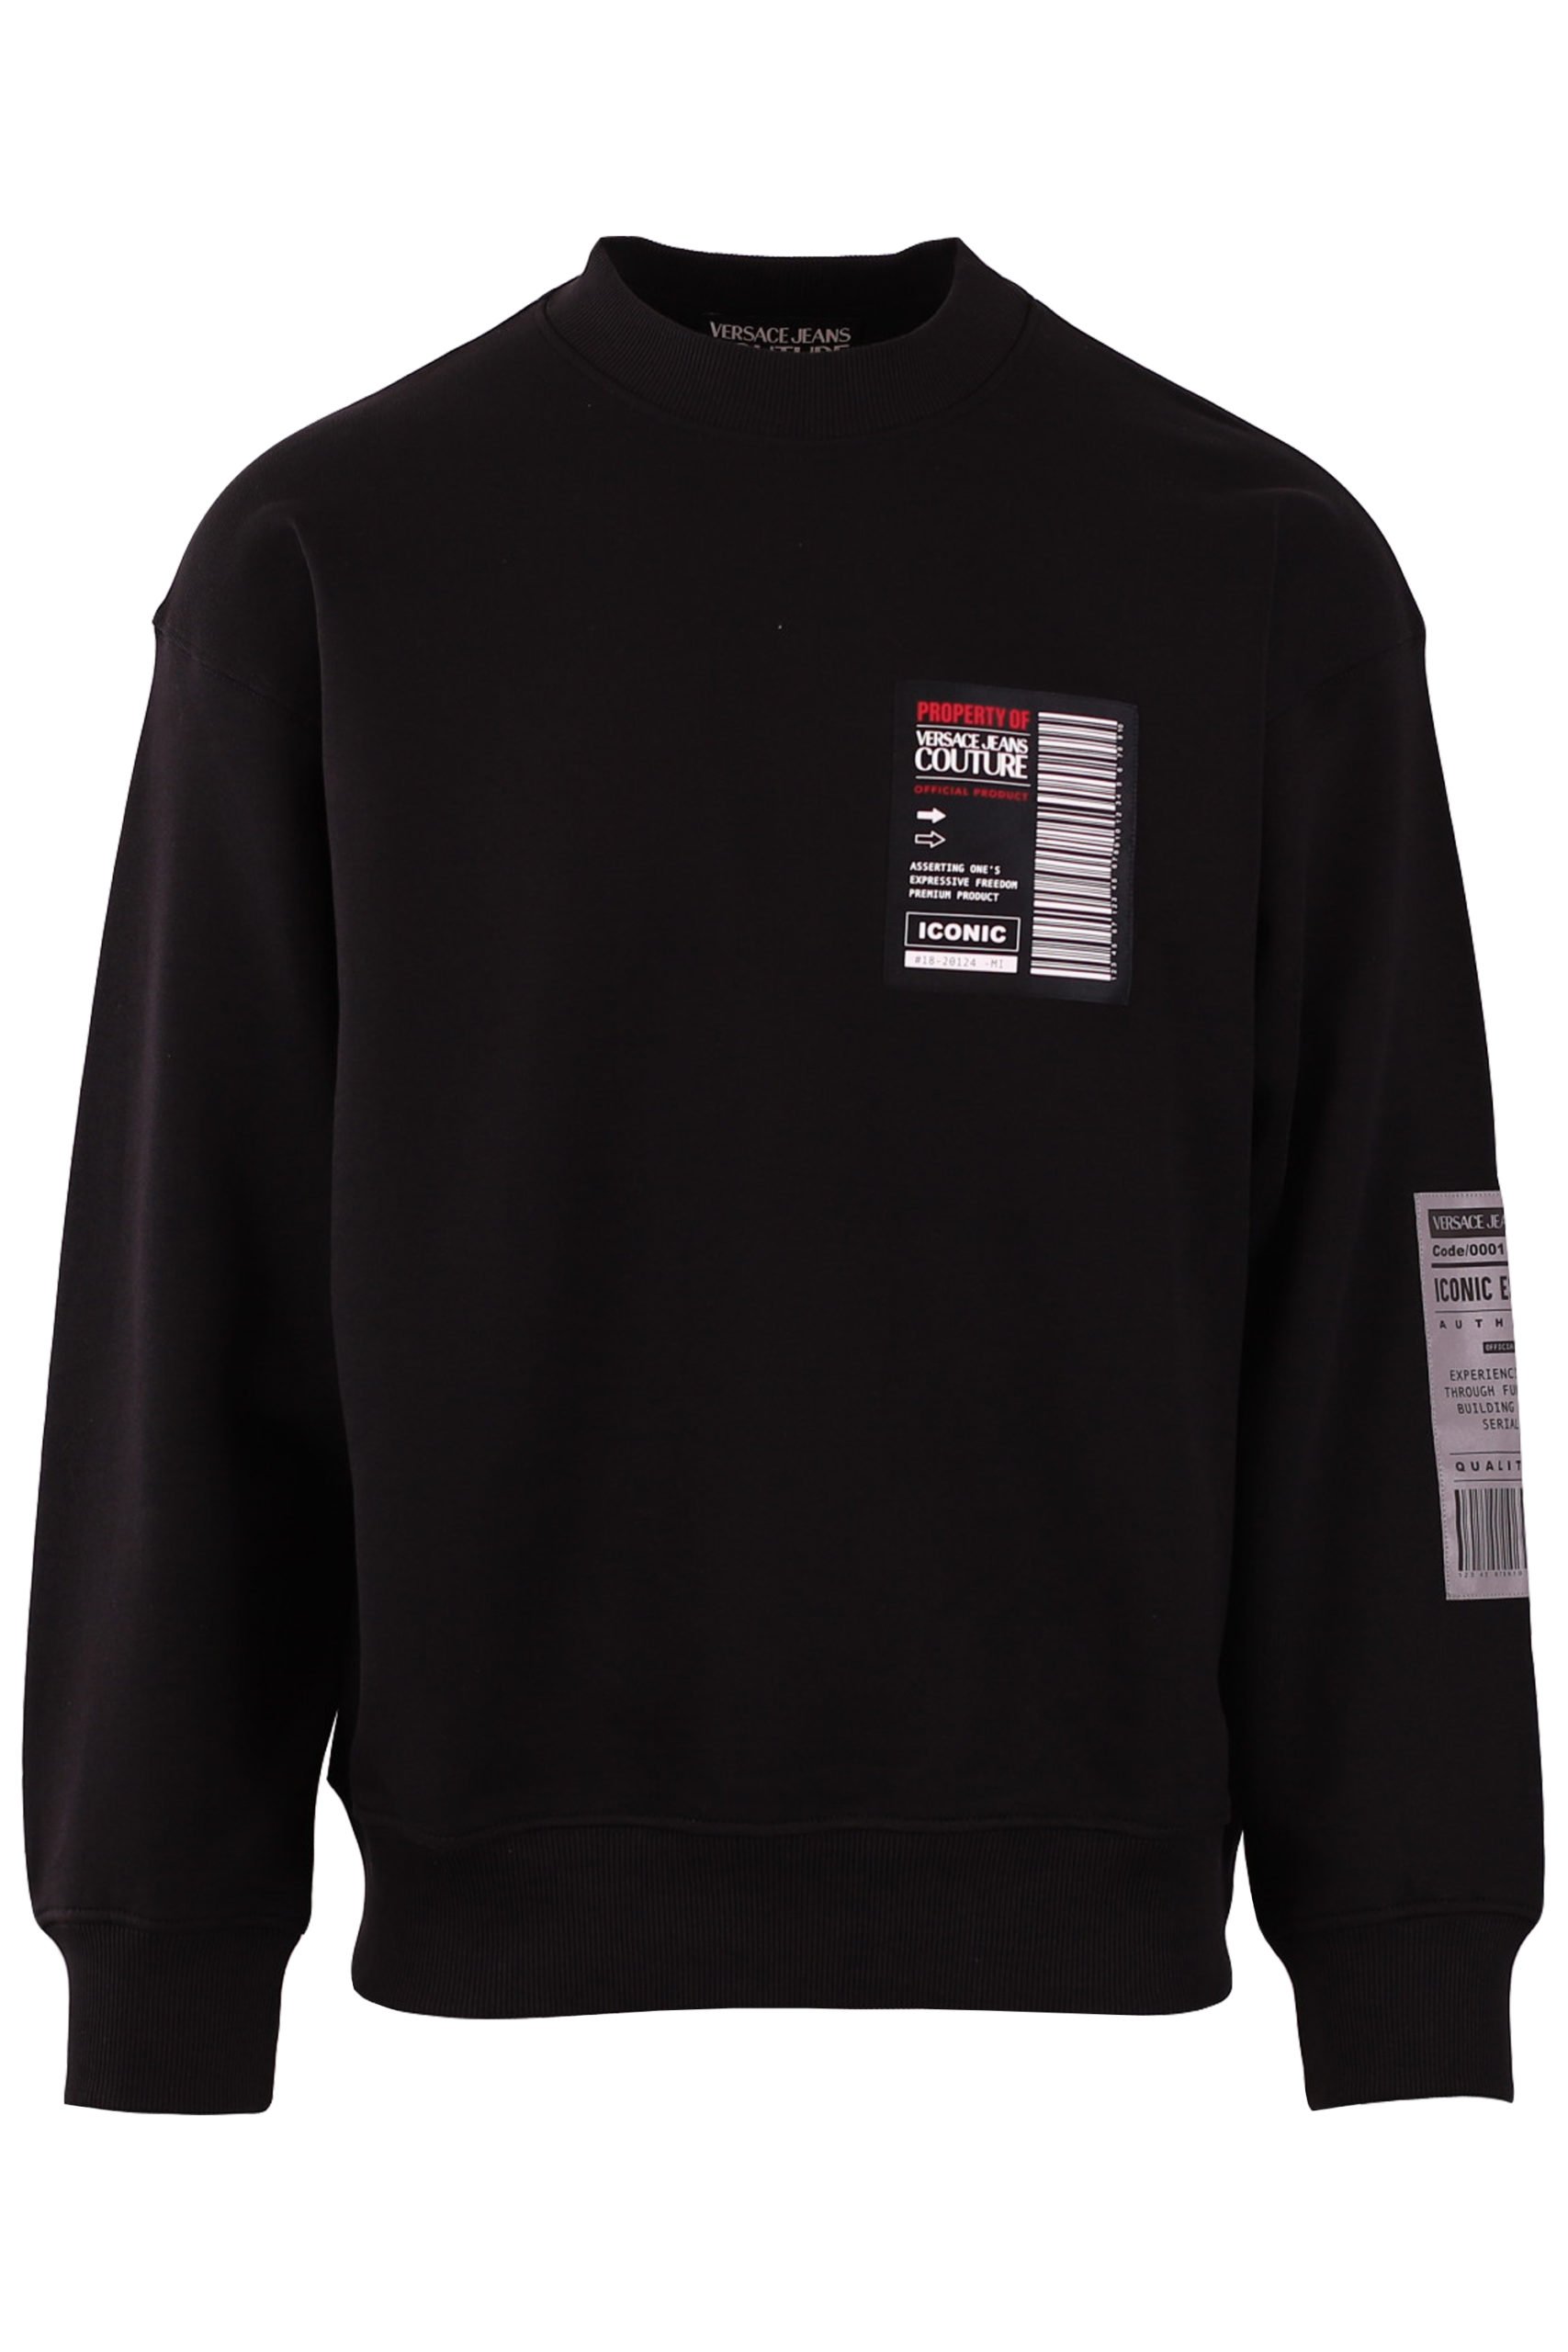 Versace Jeans Couture - Black sweatshirt with barcode logo - BLS